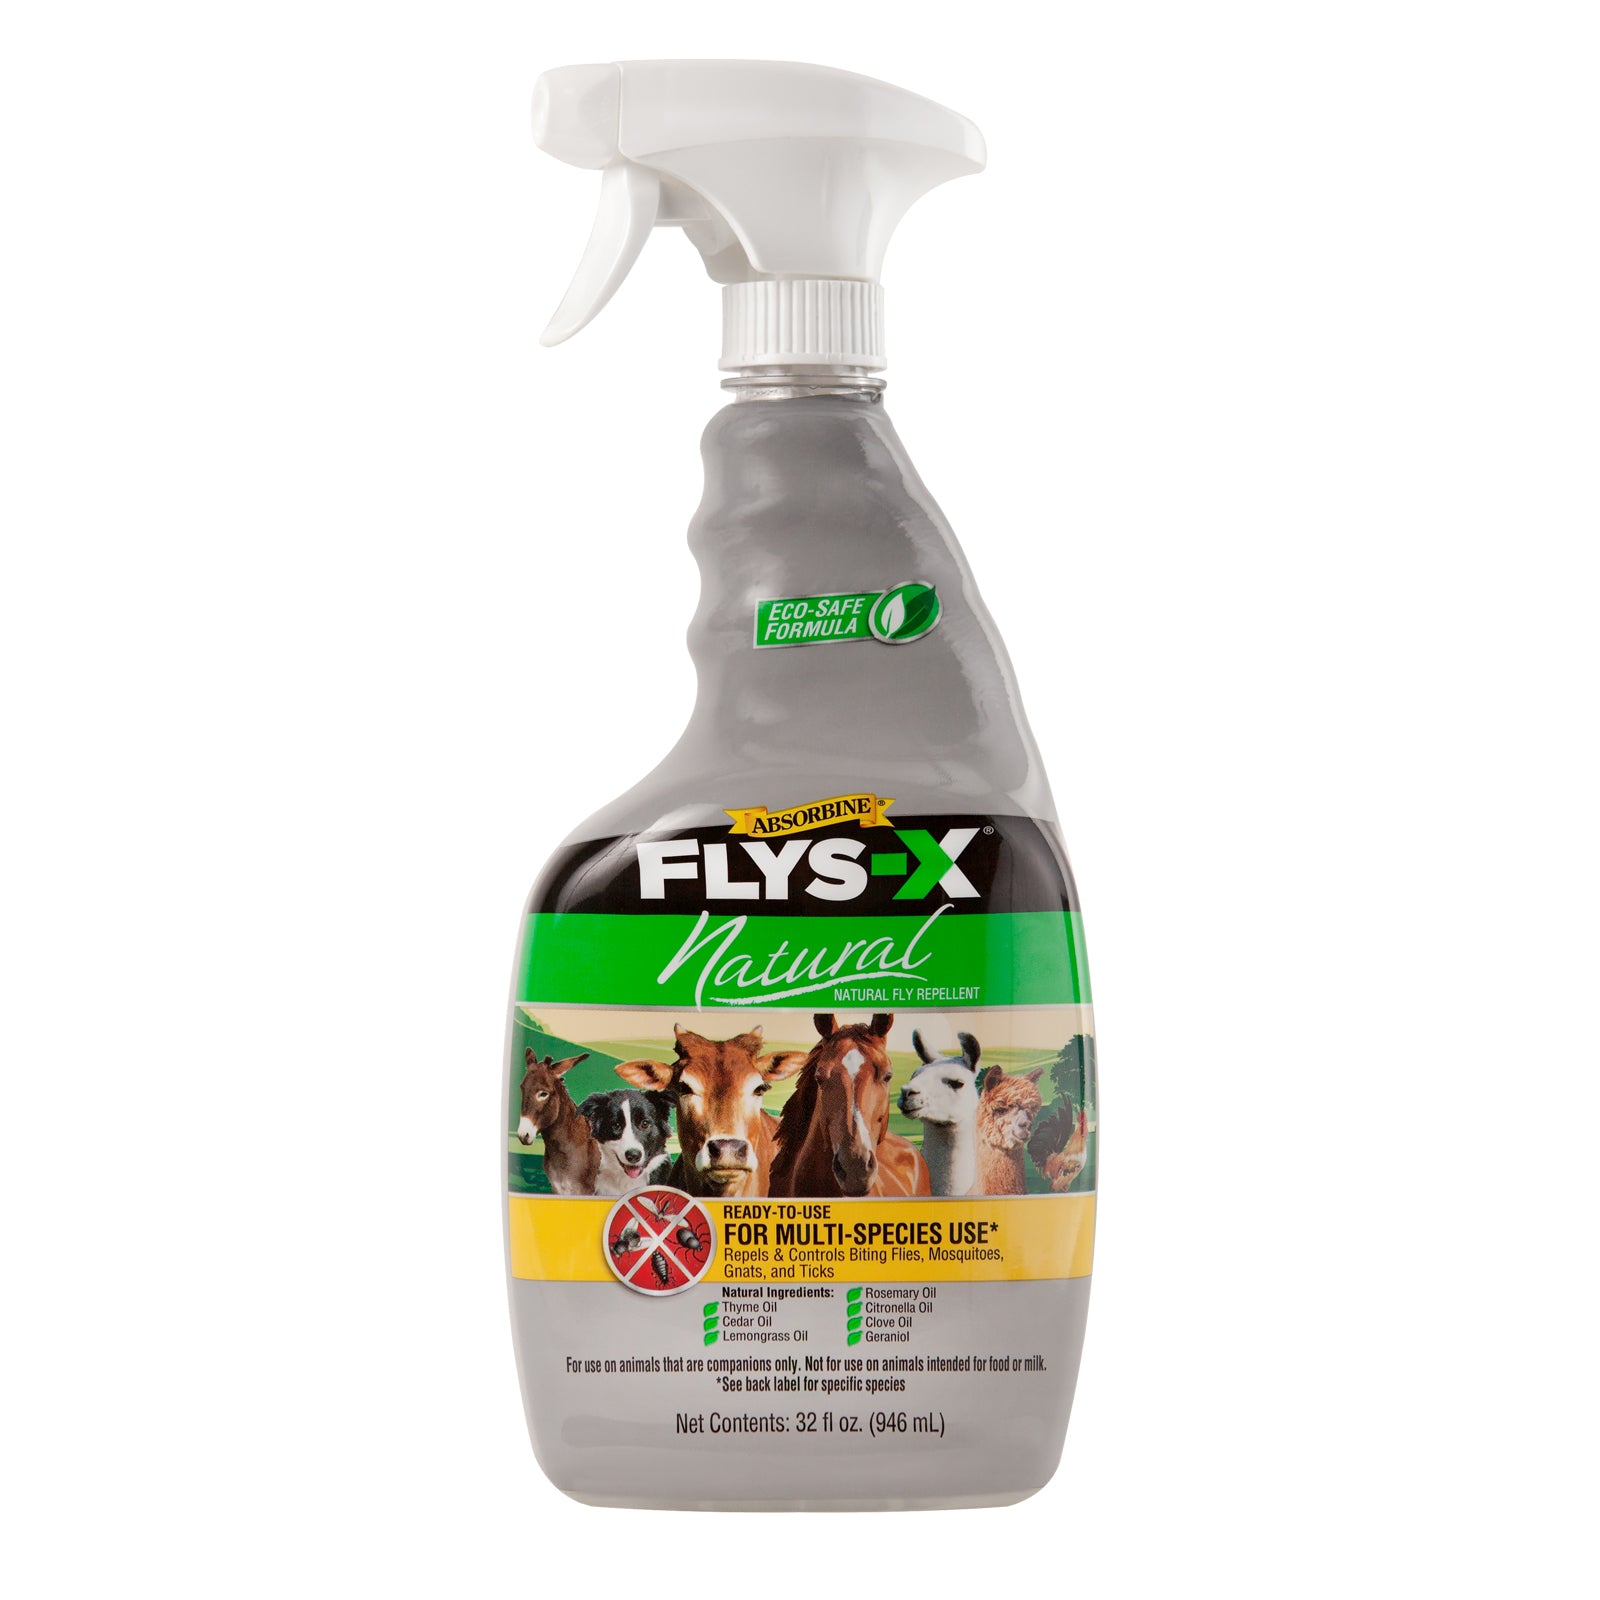 Absorbine Flys-X Natural fly repellent 32 fluid oz. Eco-safe formula bottle and sprayer.  Ready to use for multi species use.